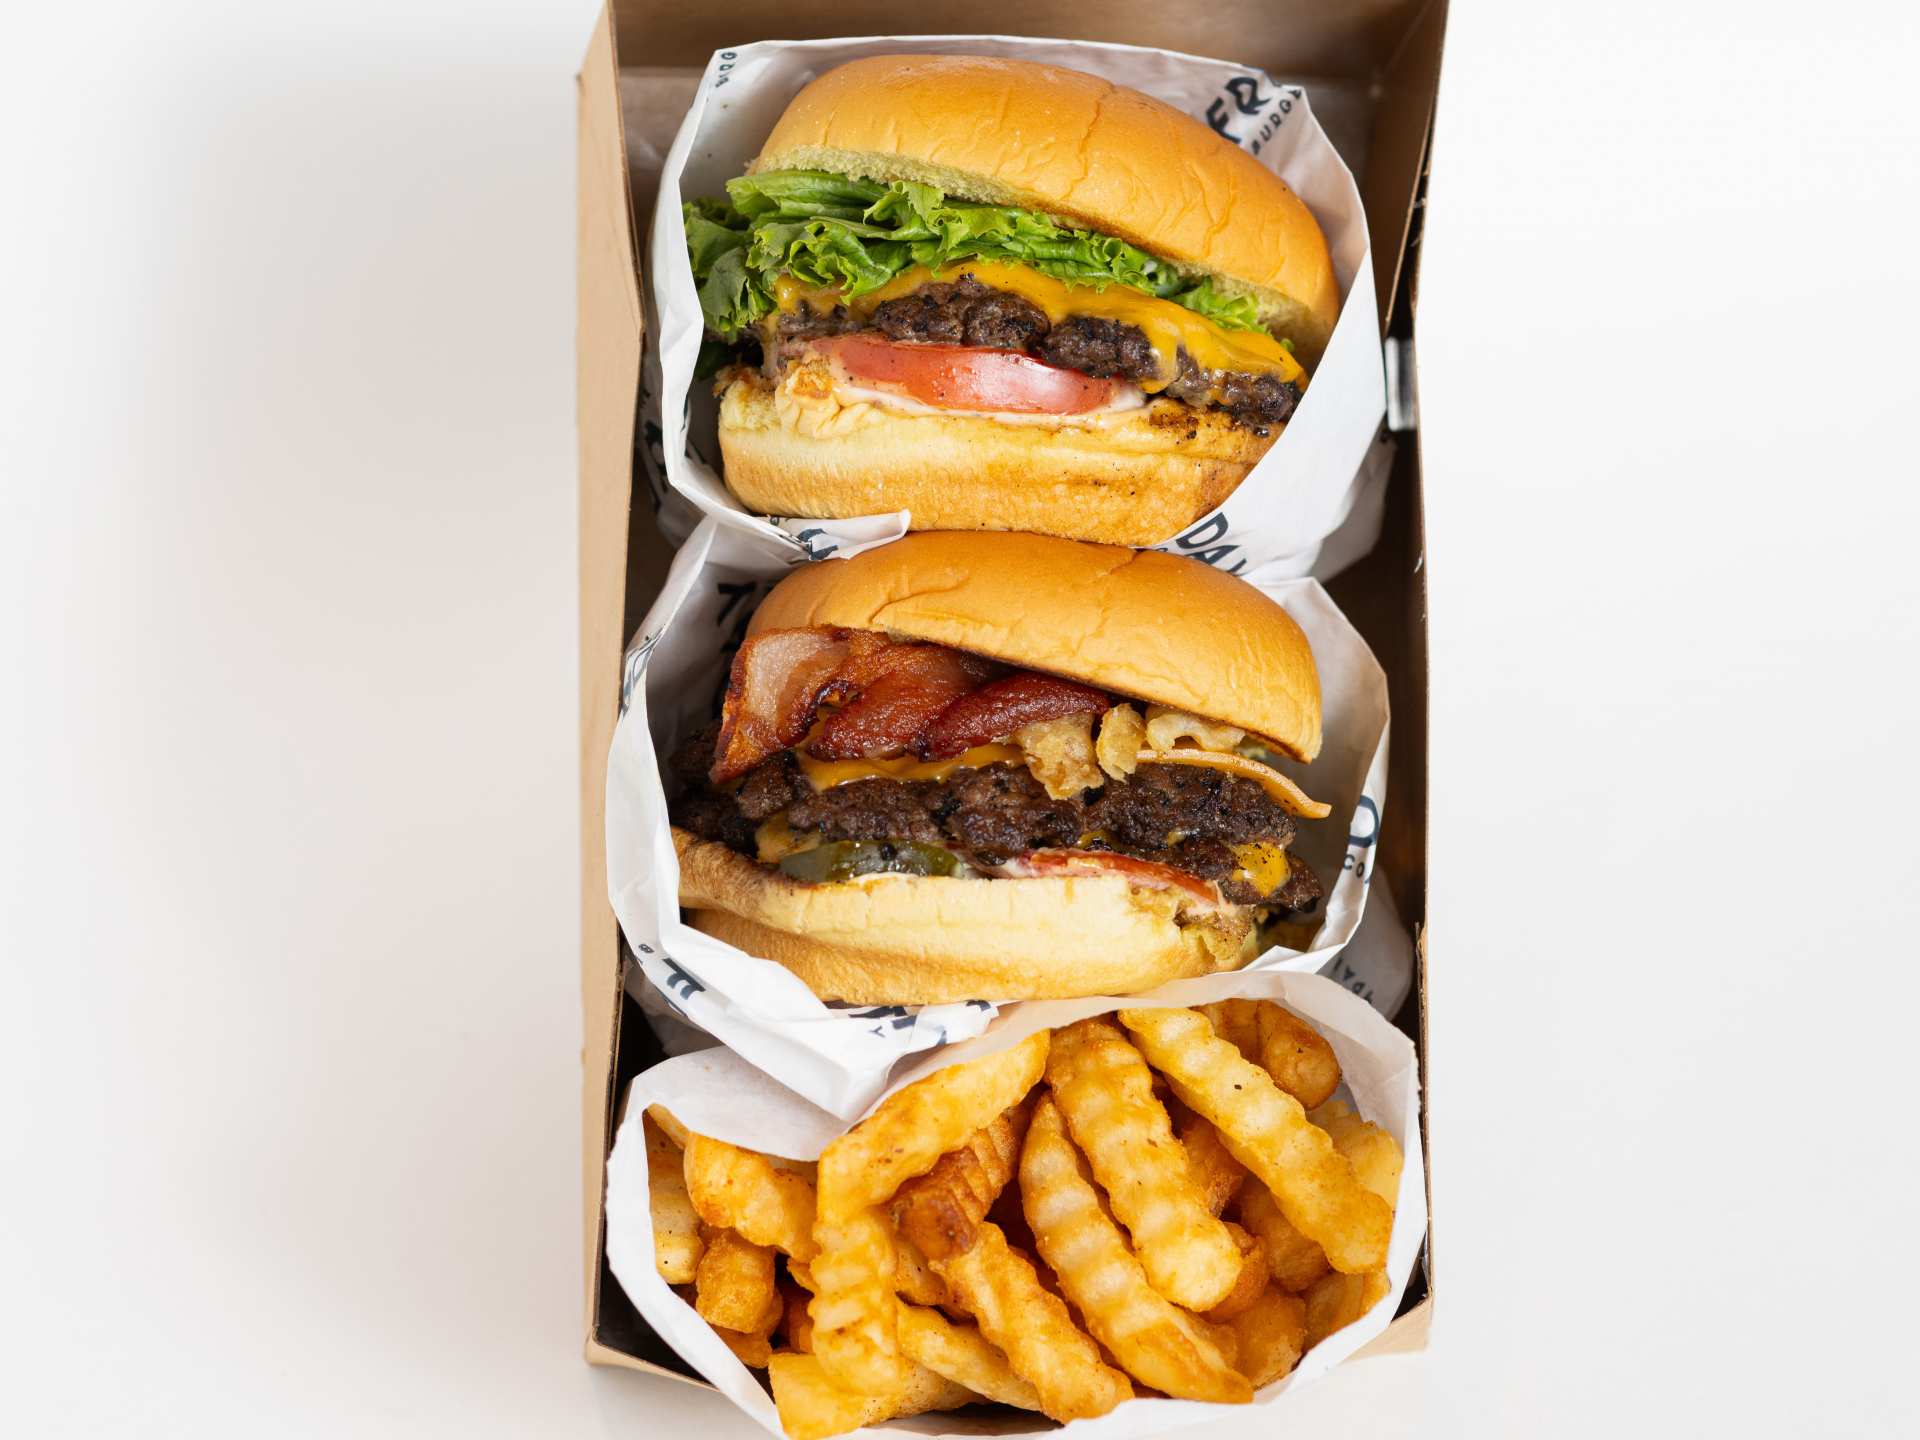 New Toronto restaurants | Two burgers and a side of fries at Friday Burger Company